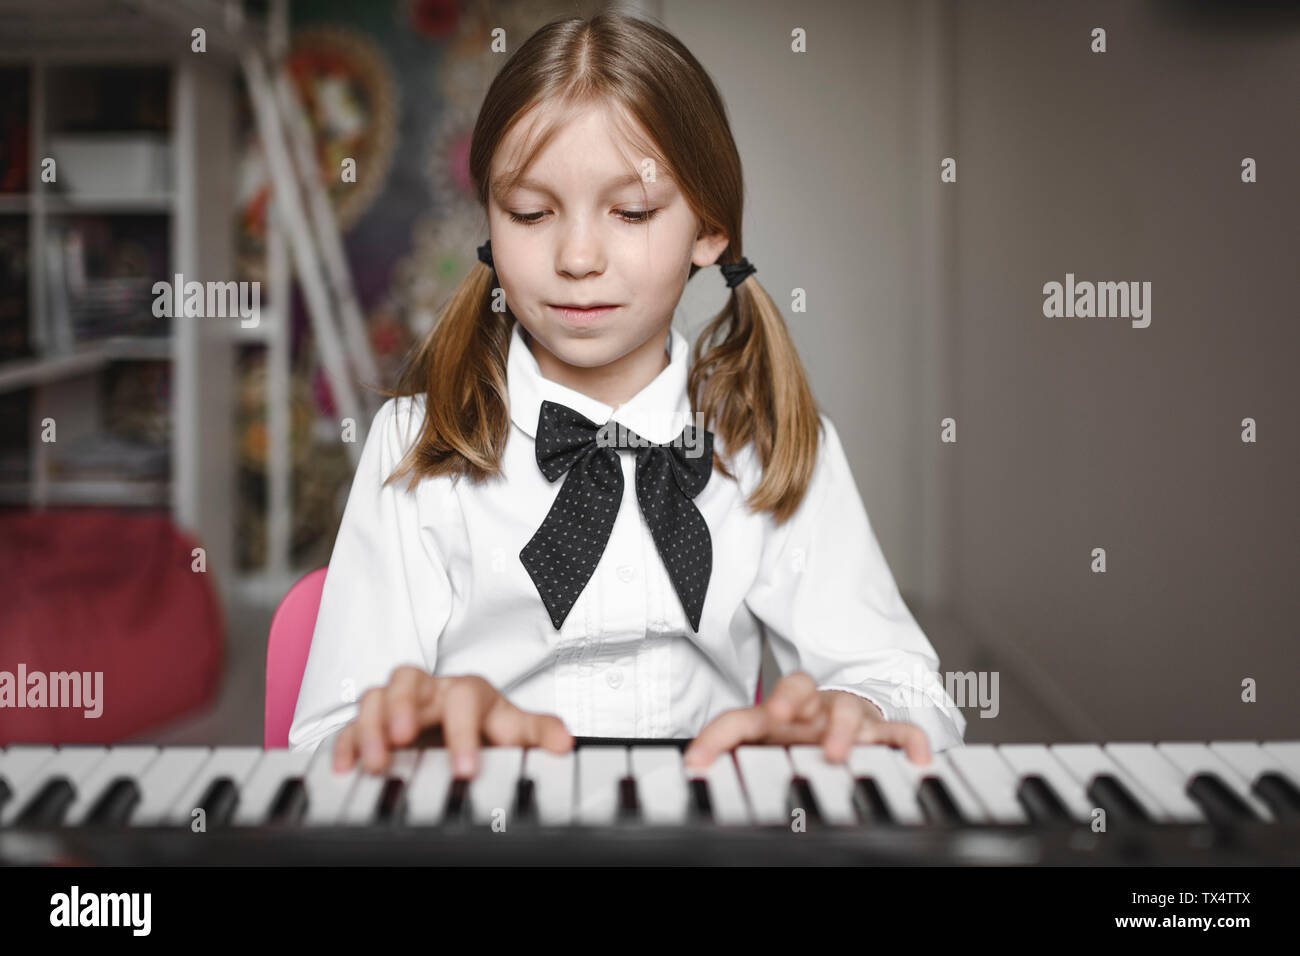 Portrait of a girl playing synthesizer Stock Photo